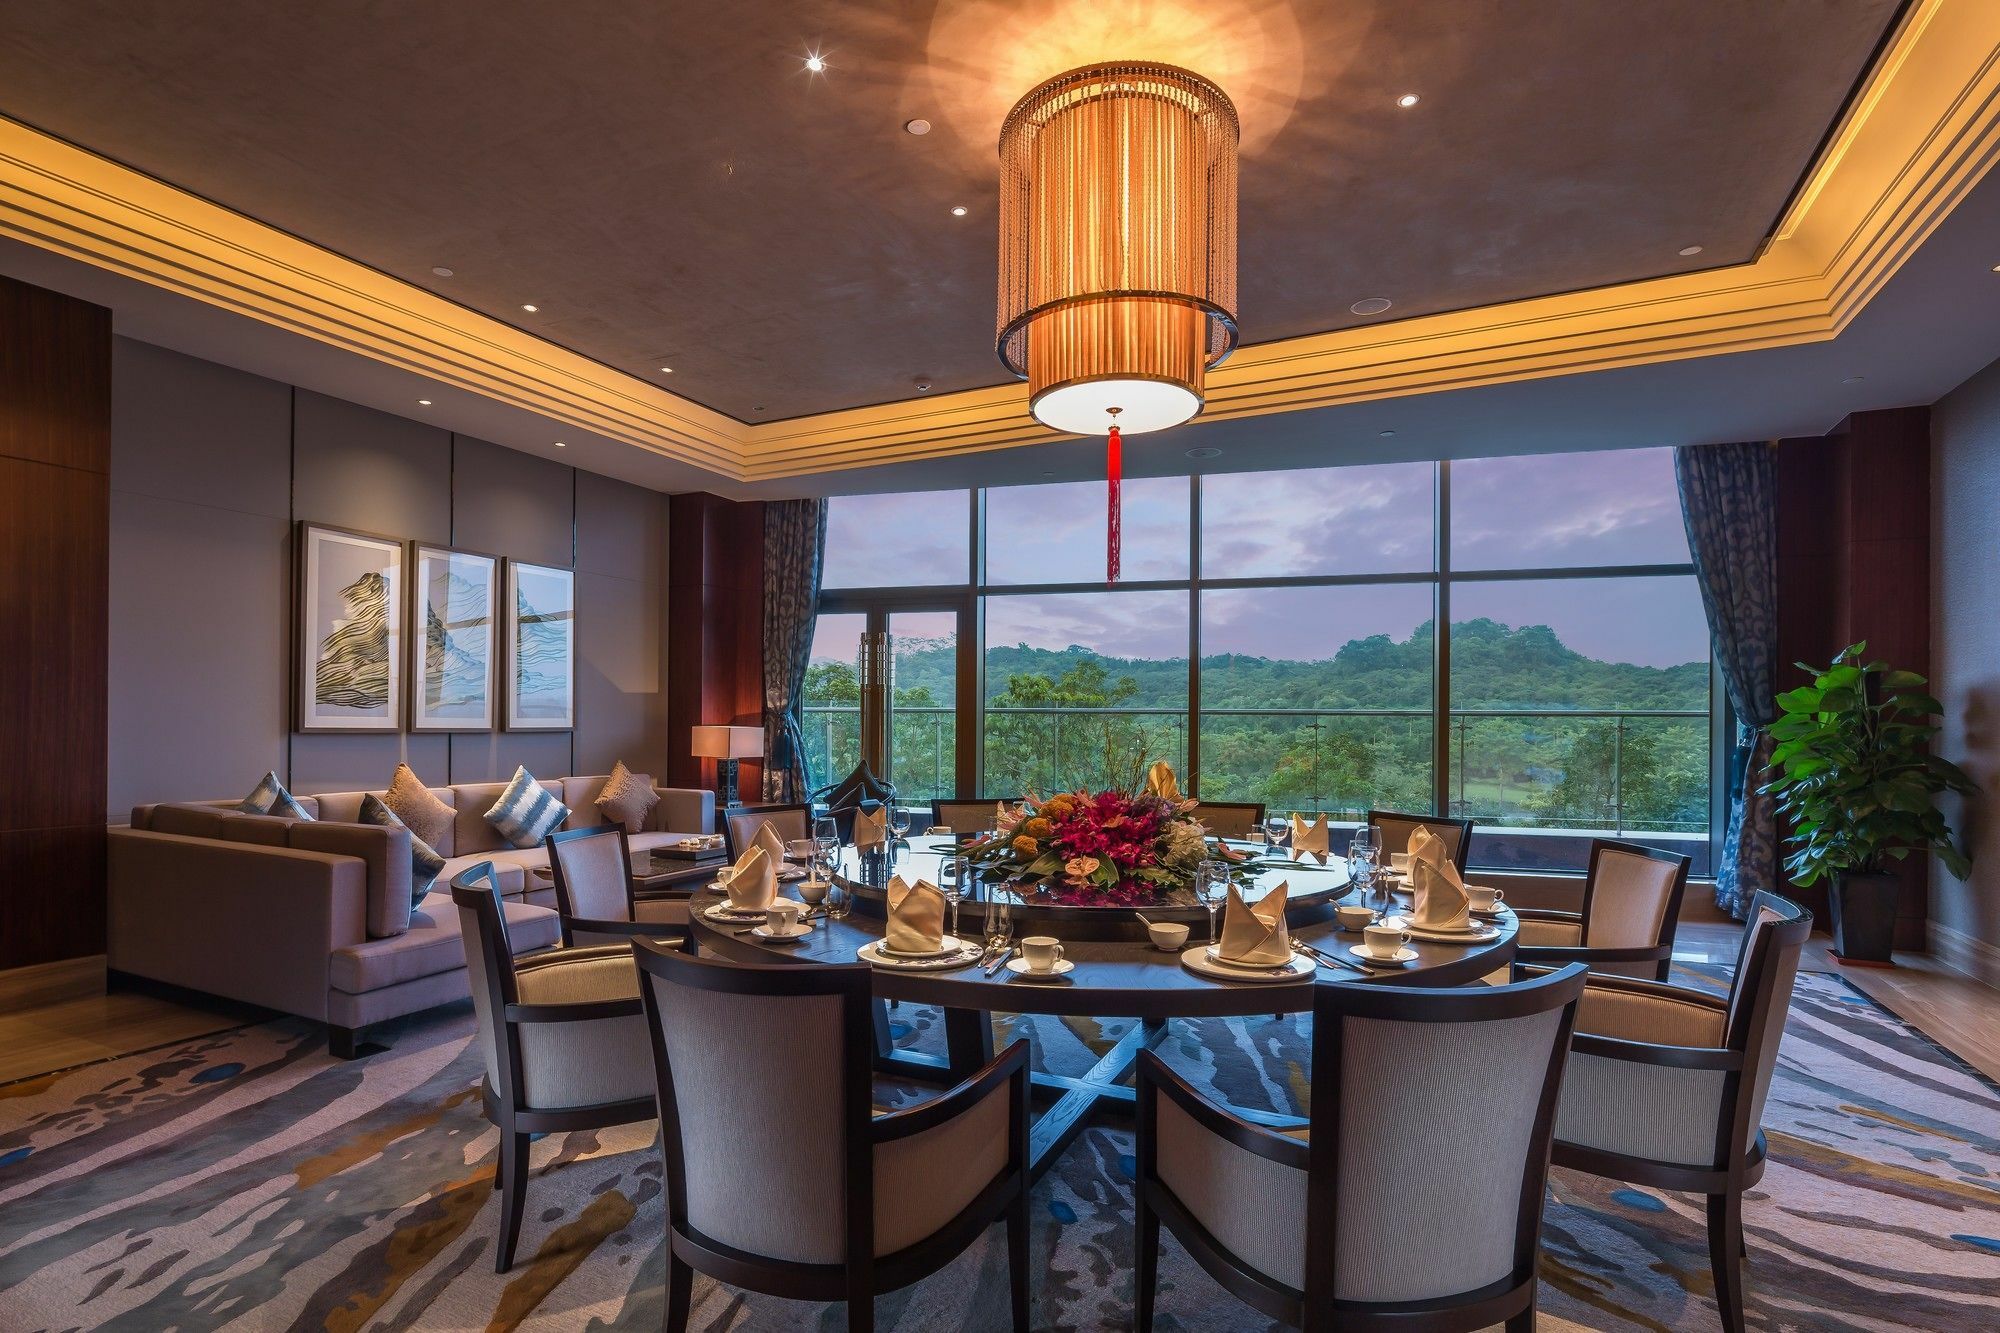 Doubletree By Hilton Hotel Guangzhou-Science City-Free Shuttle Bus To Canton Fair Complex And Dining Offer Zewnętrze zdjęcie